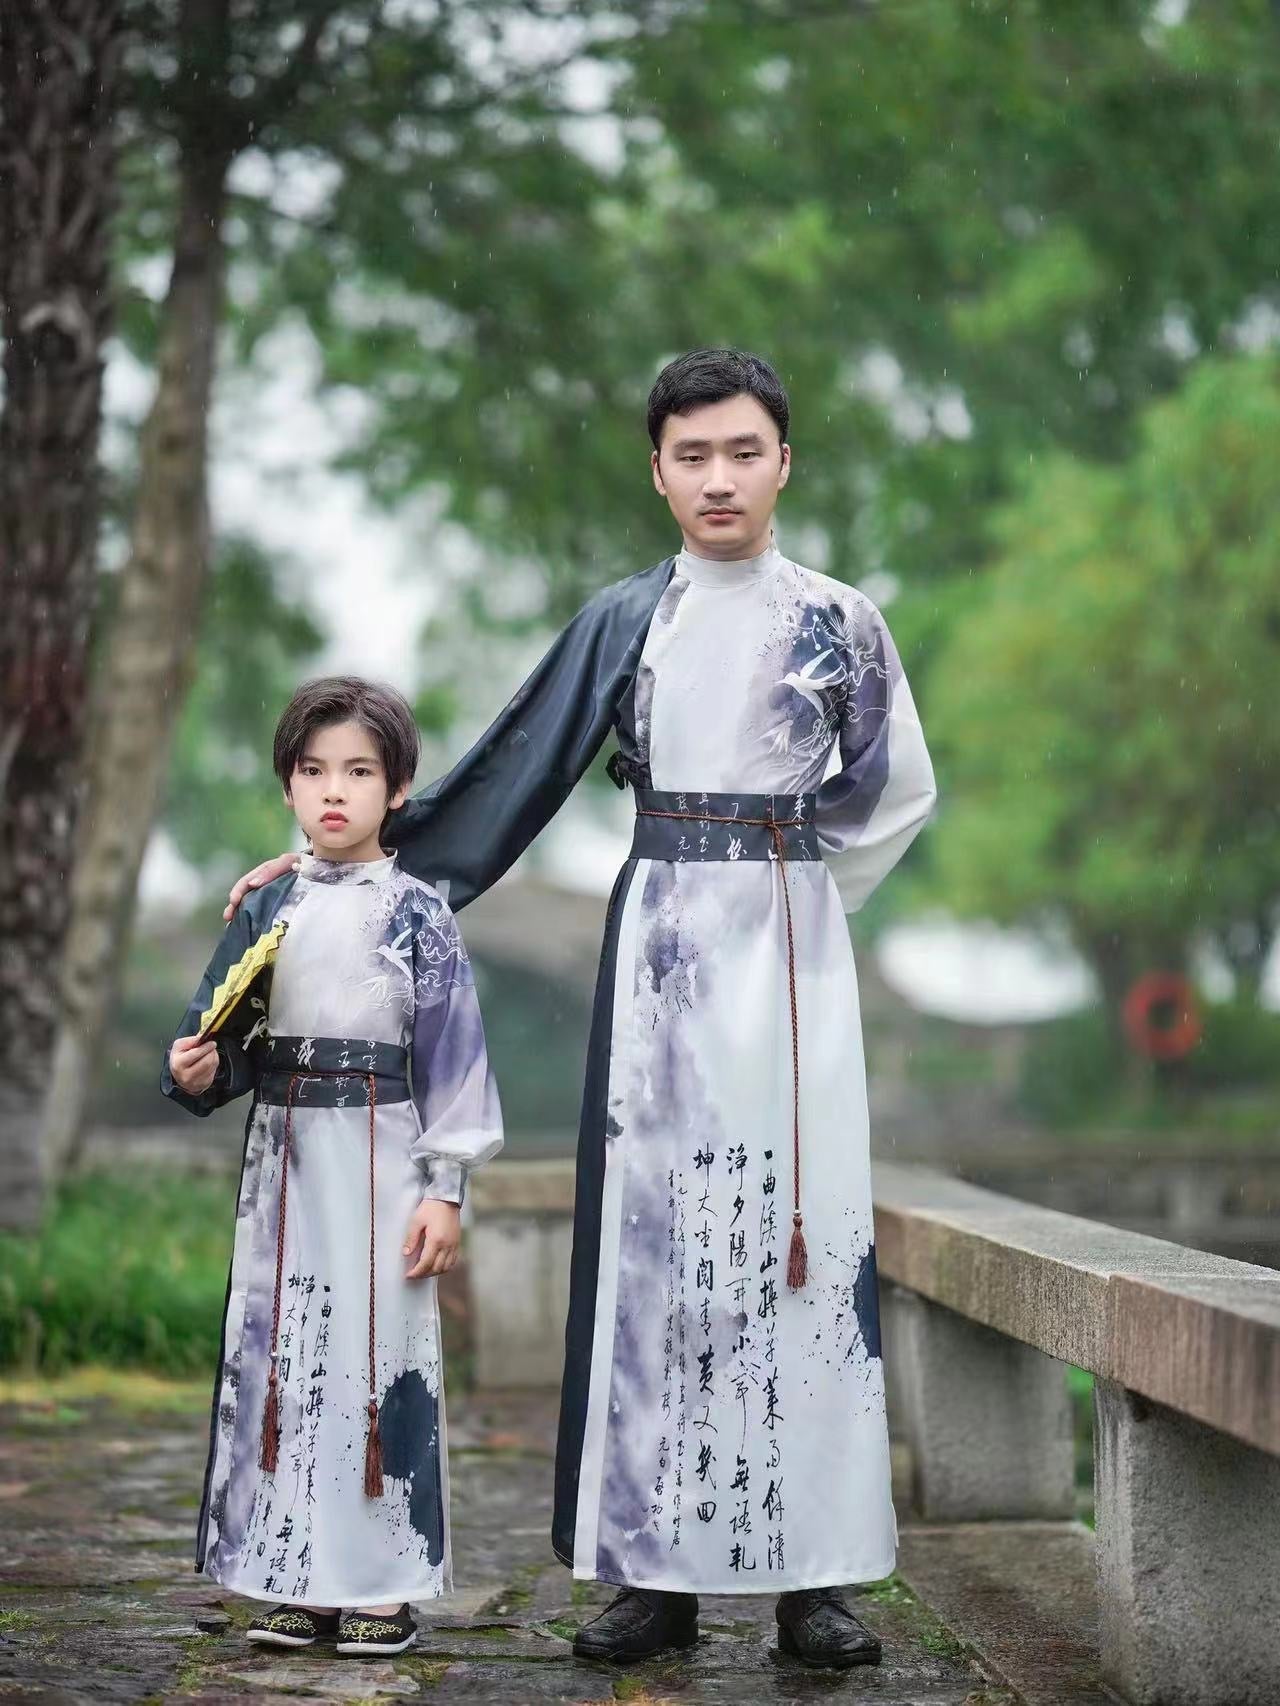 Copy of Qingfeng Wuchen Adult & Kids Hanfu - Elegant Family Traditional Chinese Robes